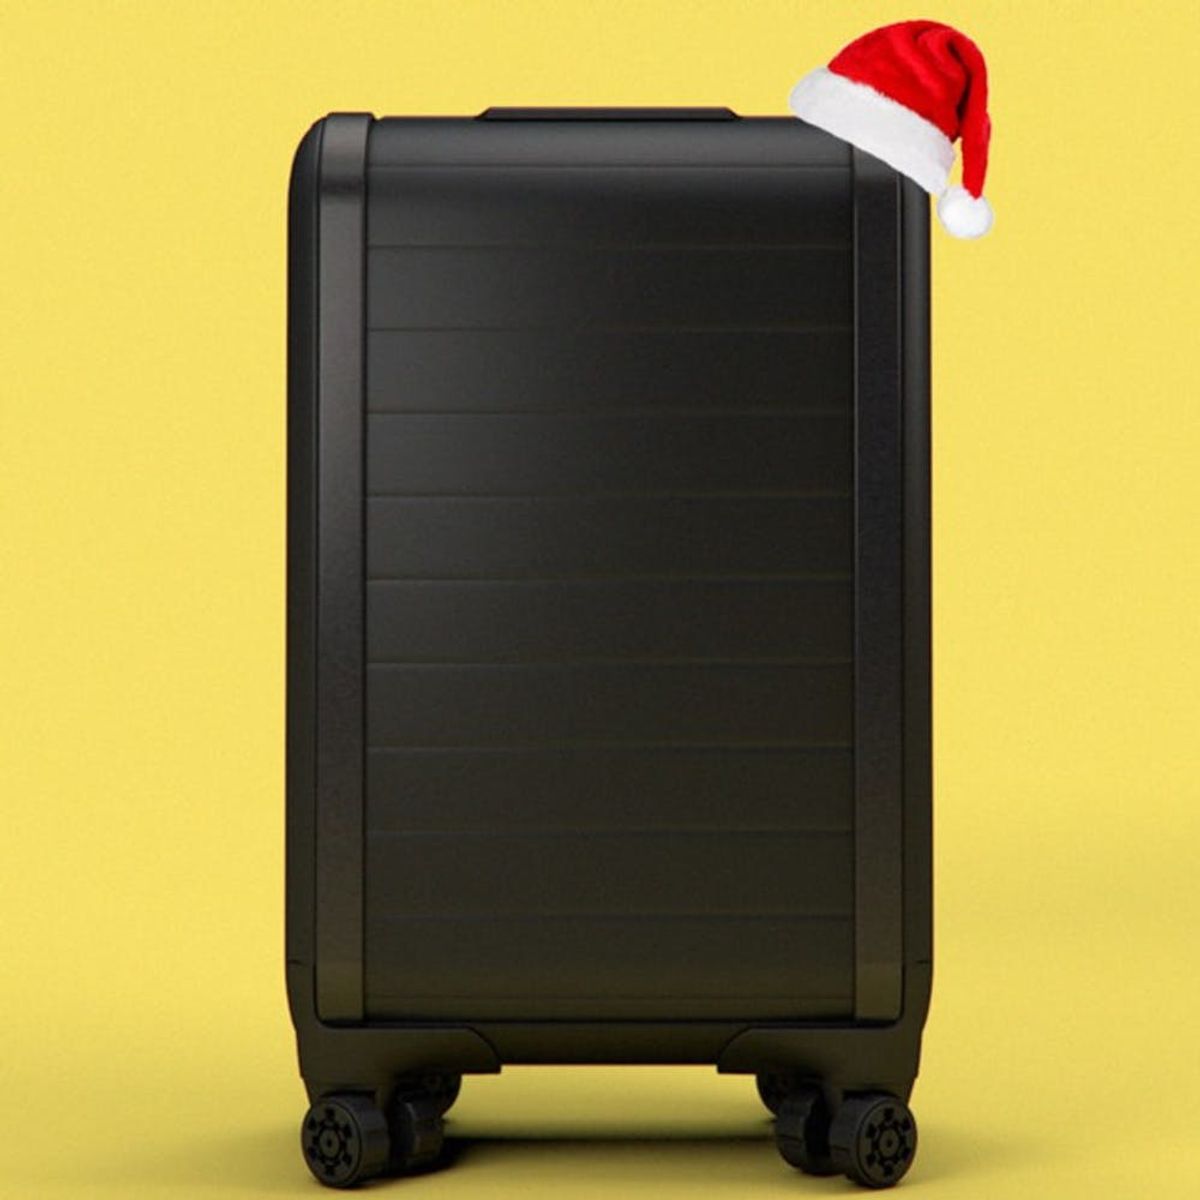 This Dream Luggage Will Make Next Year’s Holiday Travels Way Better